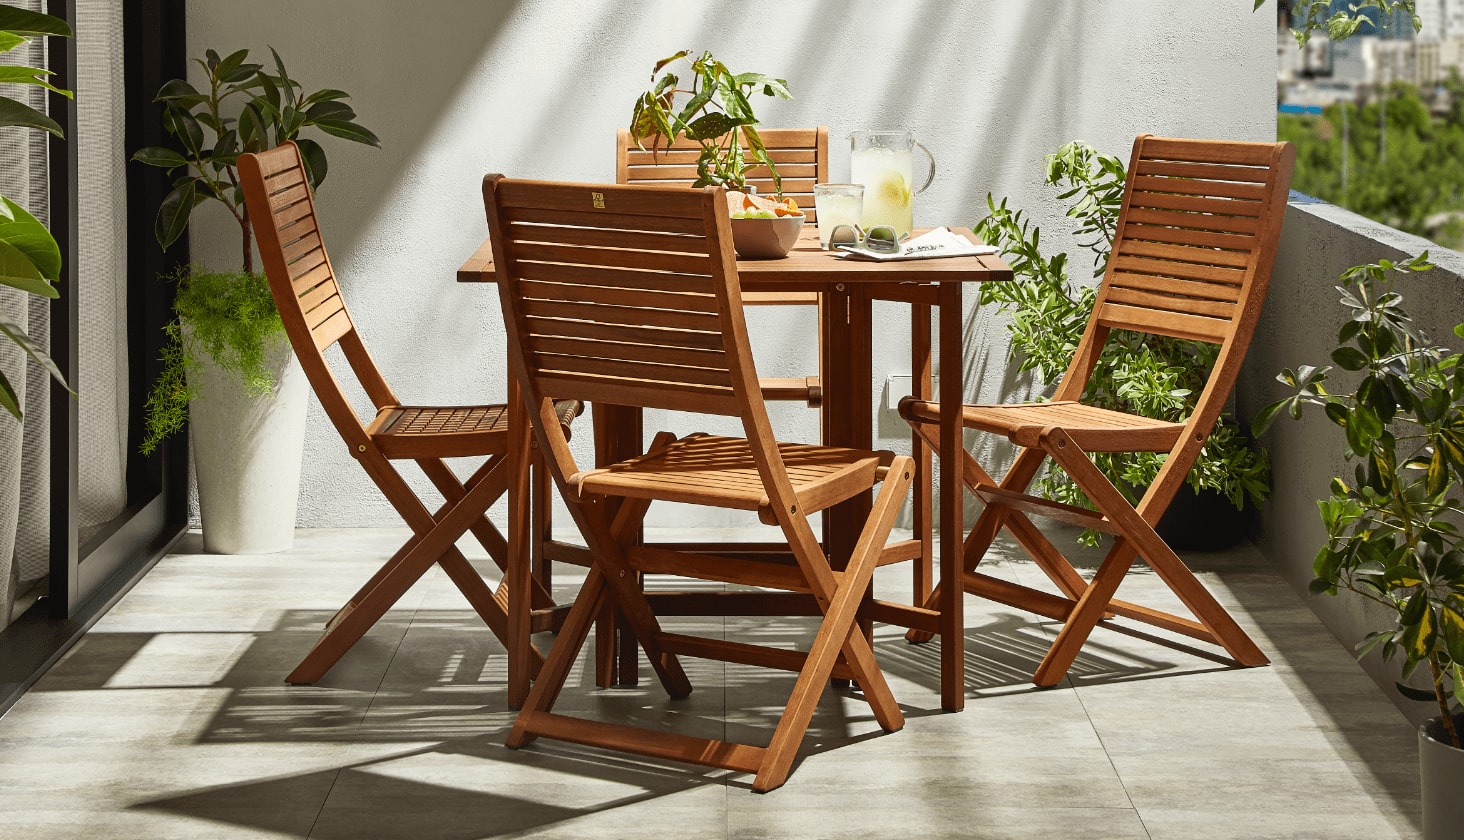 A wooden CANVAS Sherbrooke Folding Dining Set on a balcony with plants and snacks.